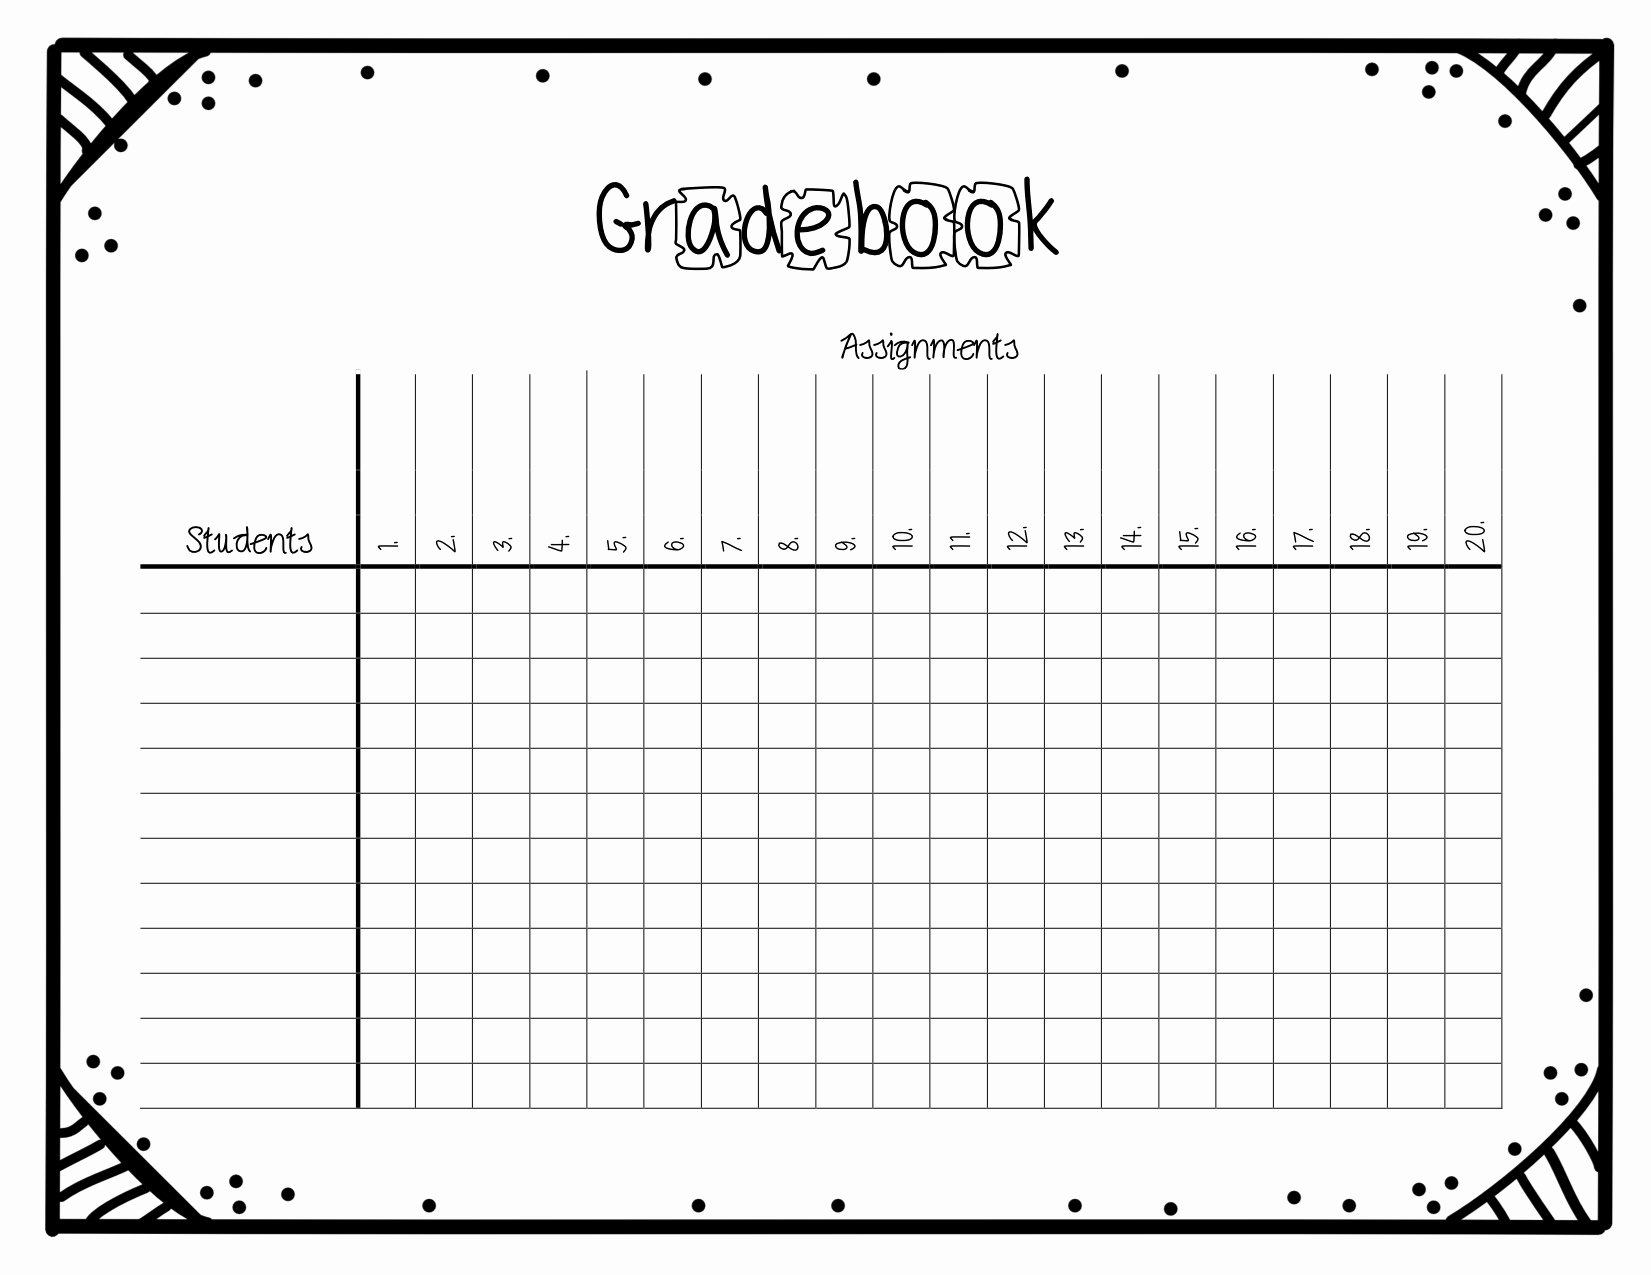 Grade Book Template Free Fresh Planning Instruction Chaos Made Prehensible – A